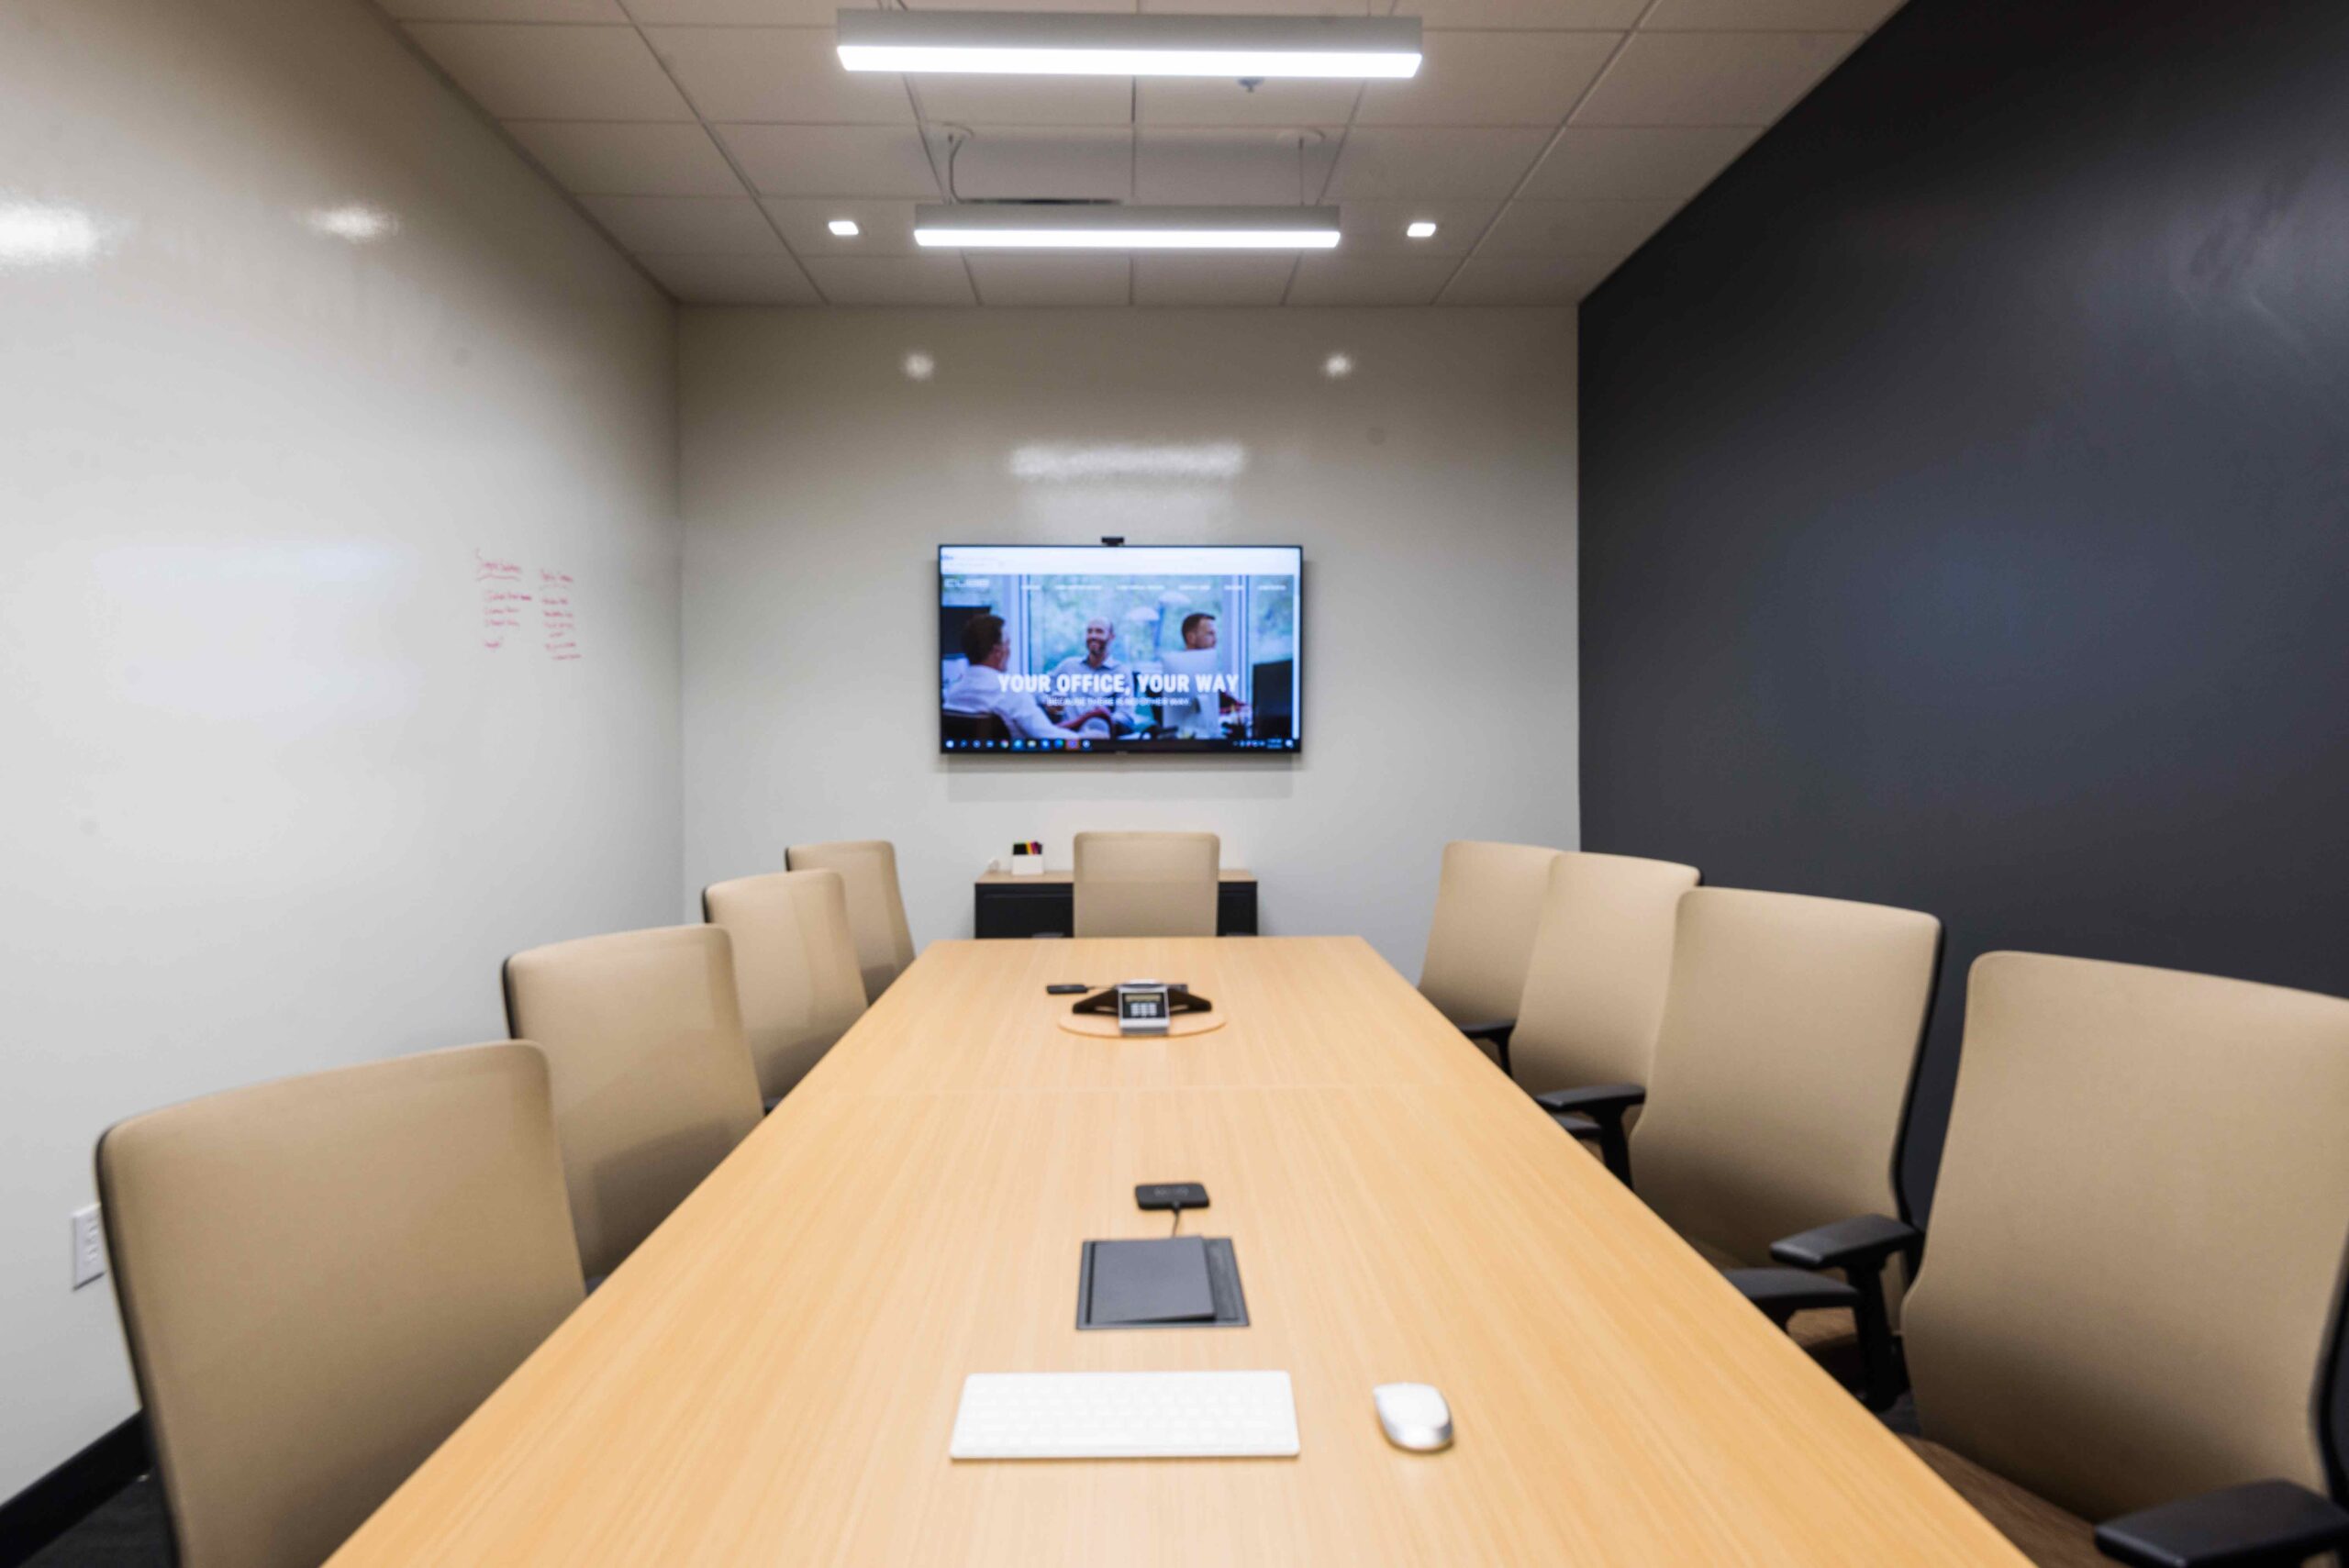 Dallas Meeting Space. Conference room table shares space for 9 people, space includes a TV.